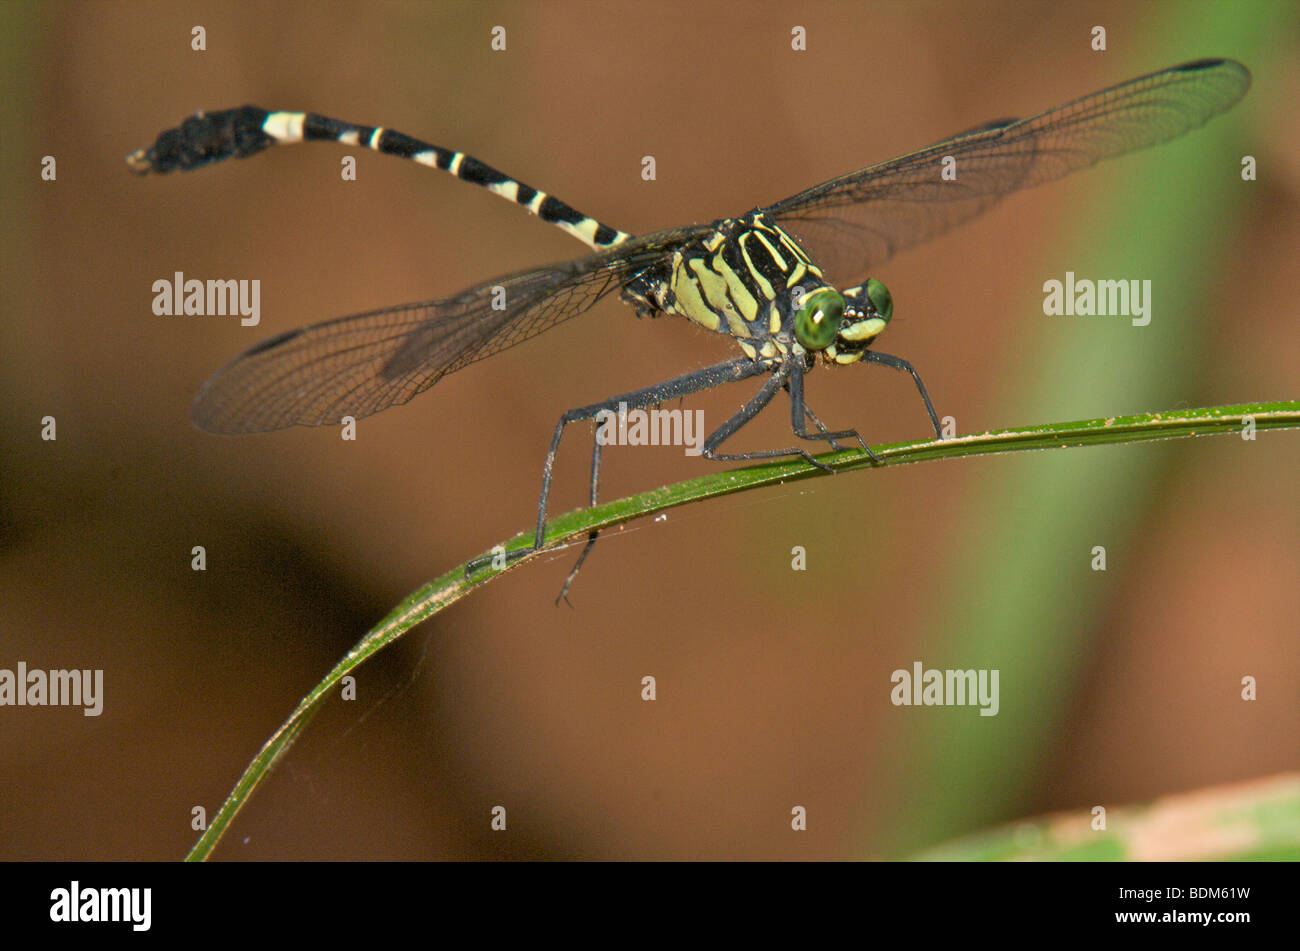 Cinese dragonfly clubtail Foto Stock